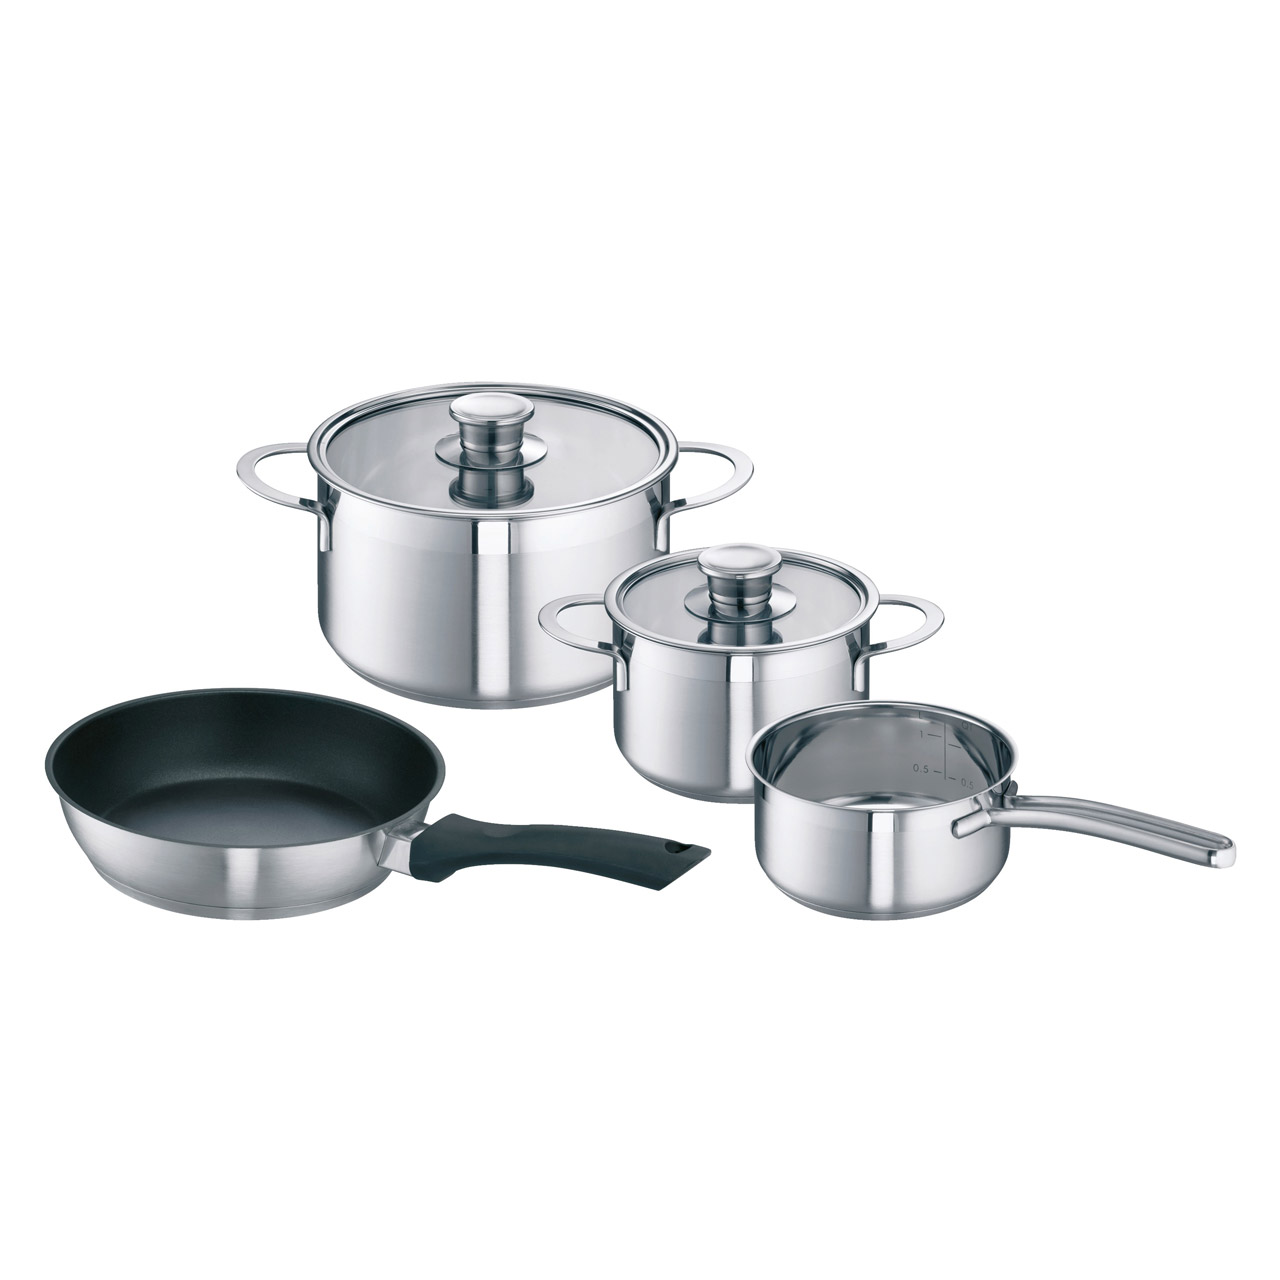 Image of Siemens HZ390042 4 Piece Induction Pot Pan Set in Stainless Steel